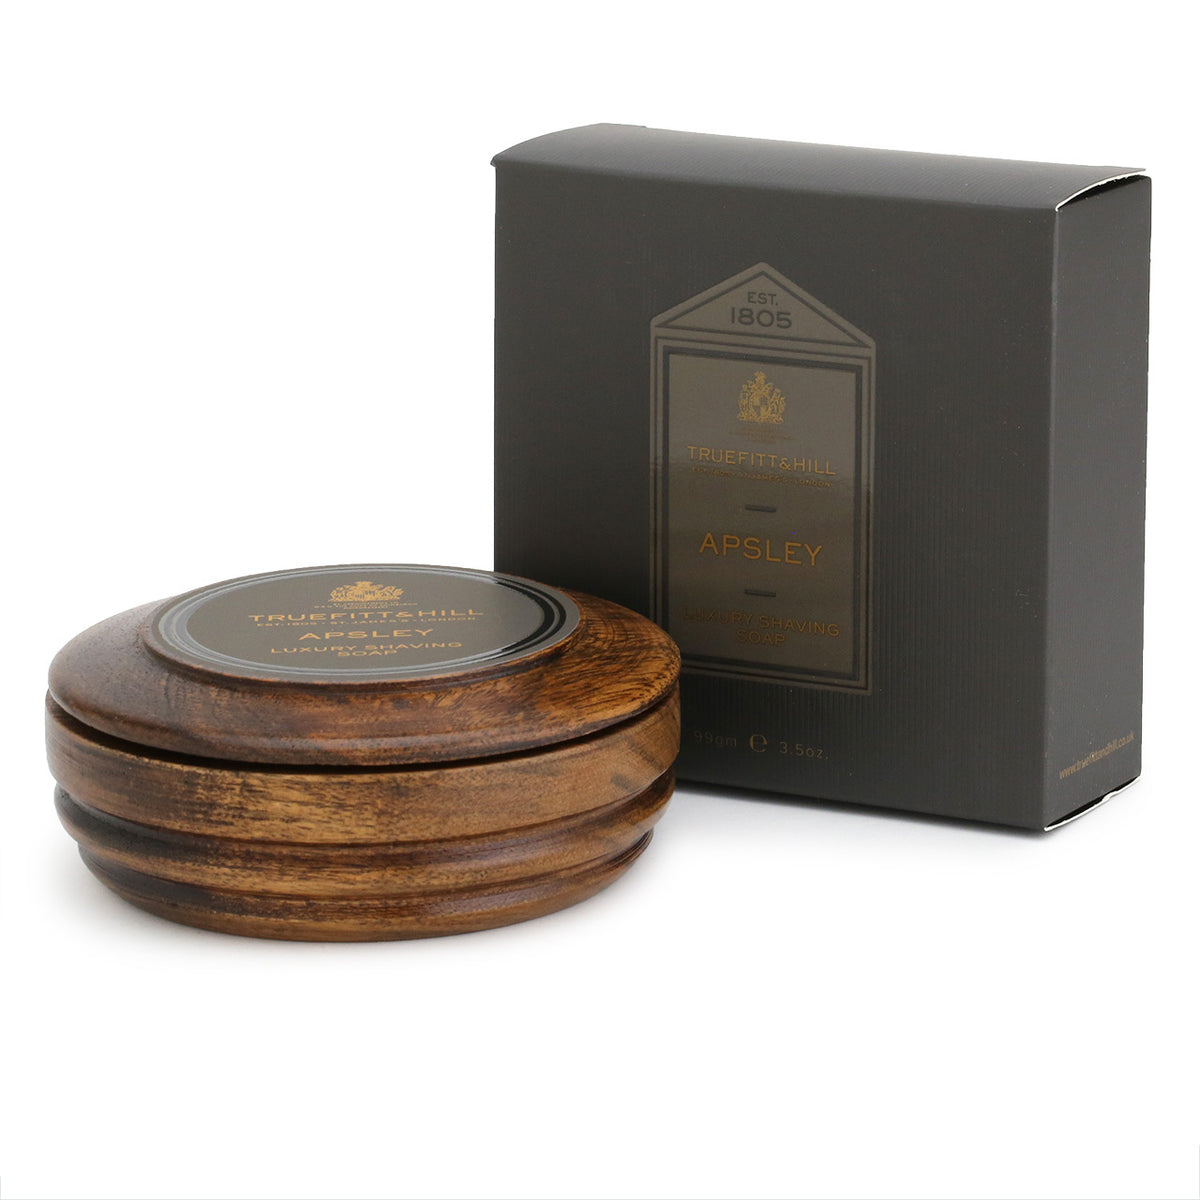 Truefitt &amp; Hill Shaving Soap in a wooden bowl, with packaging